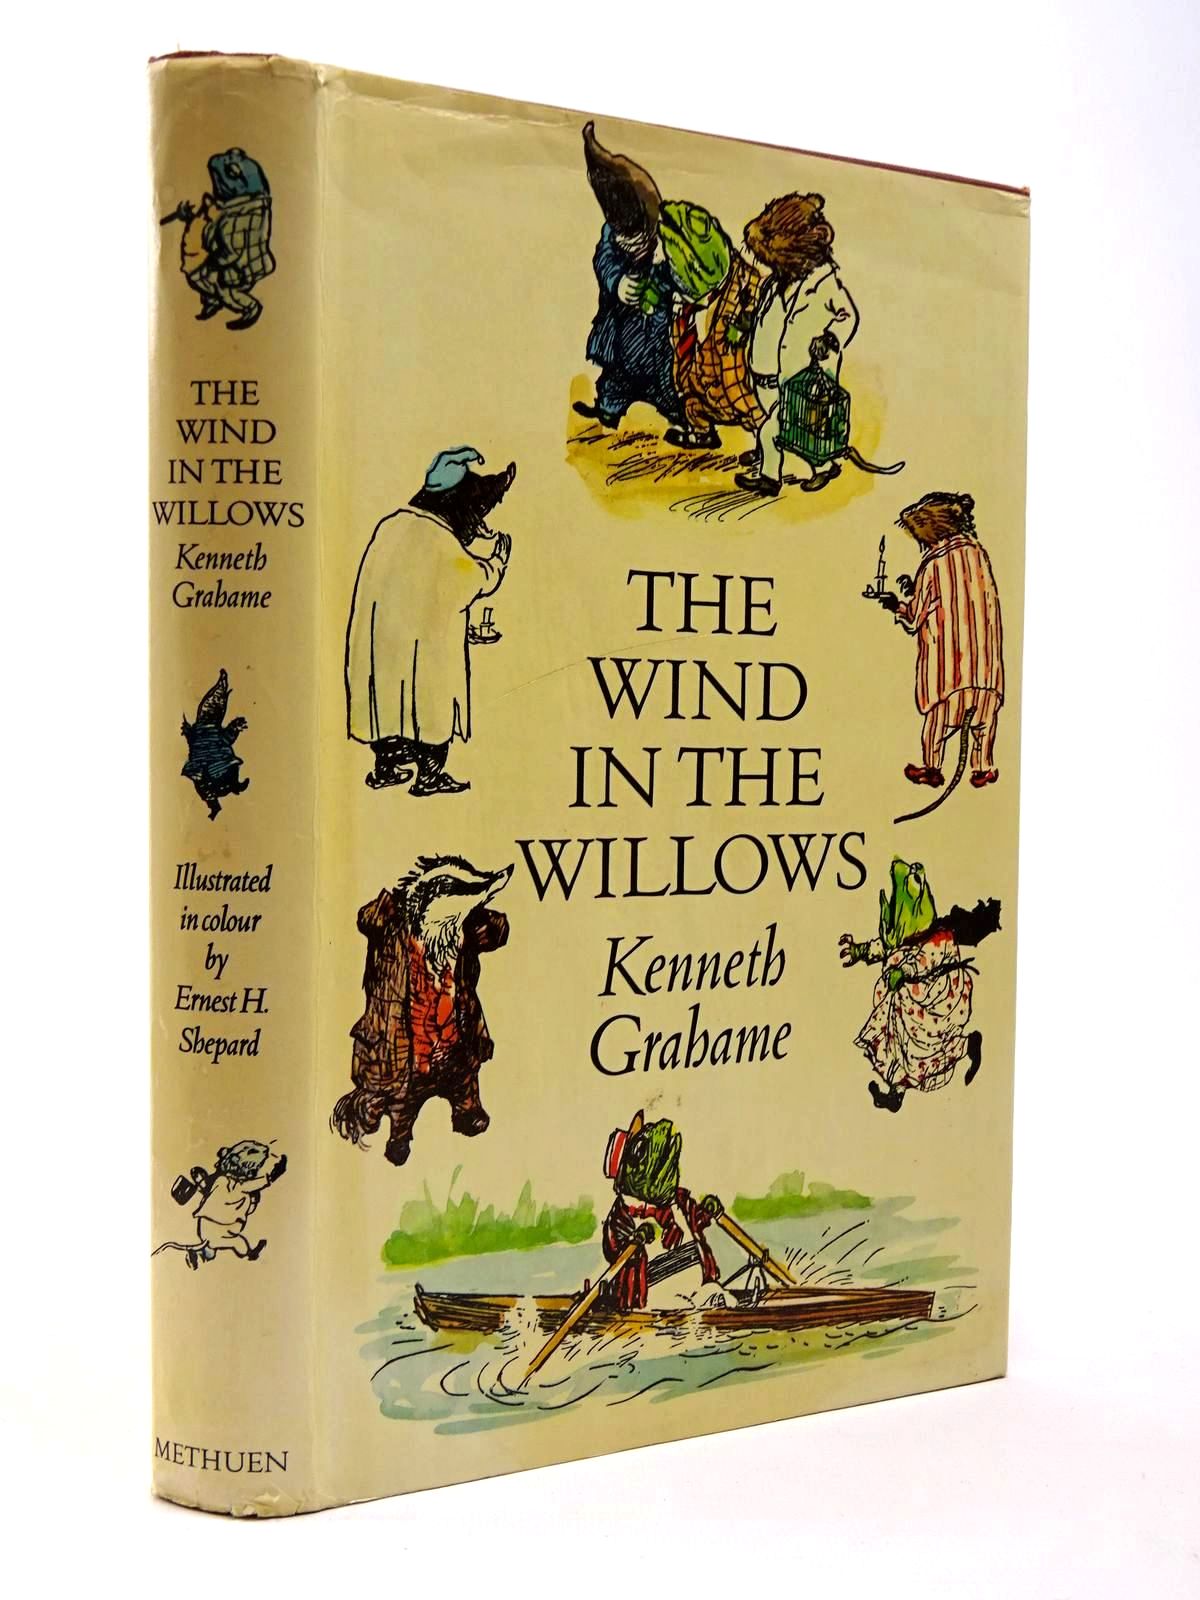 The Wind in the Willows illustration